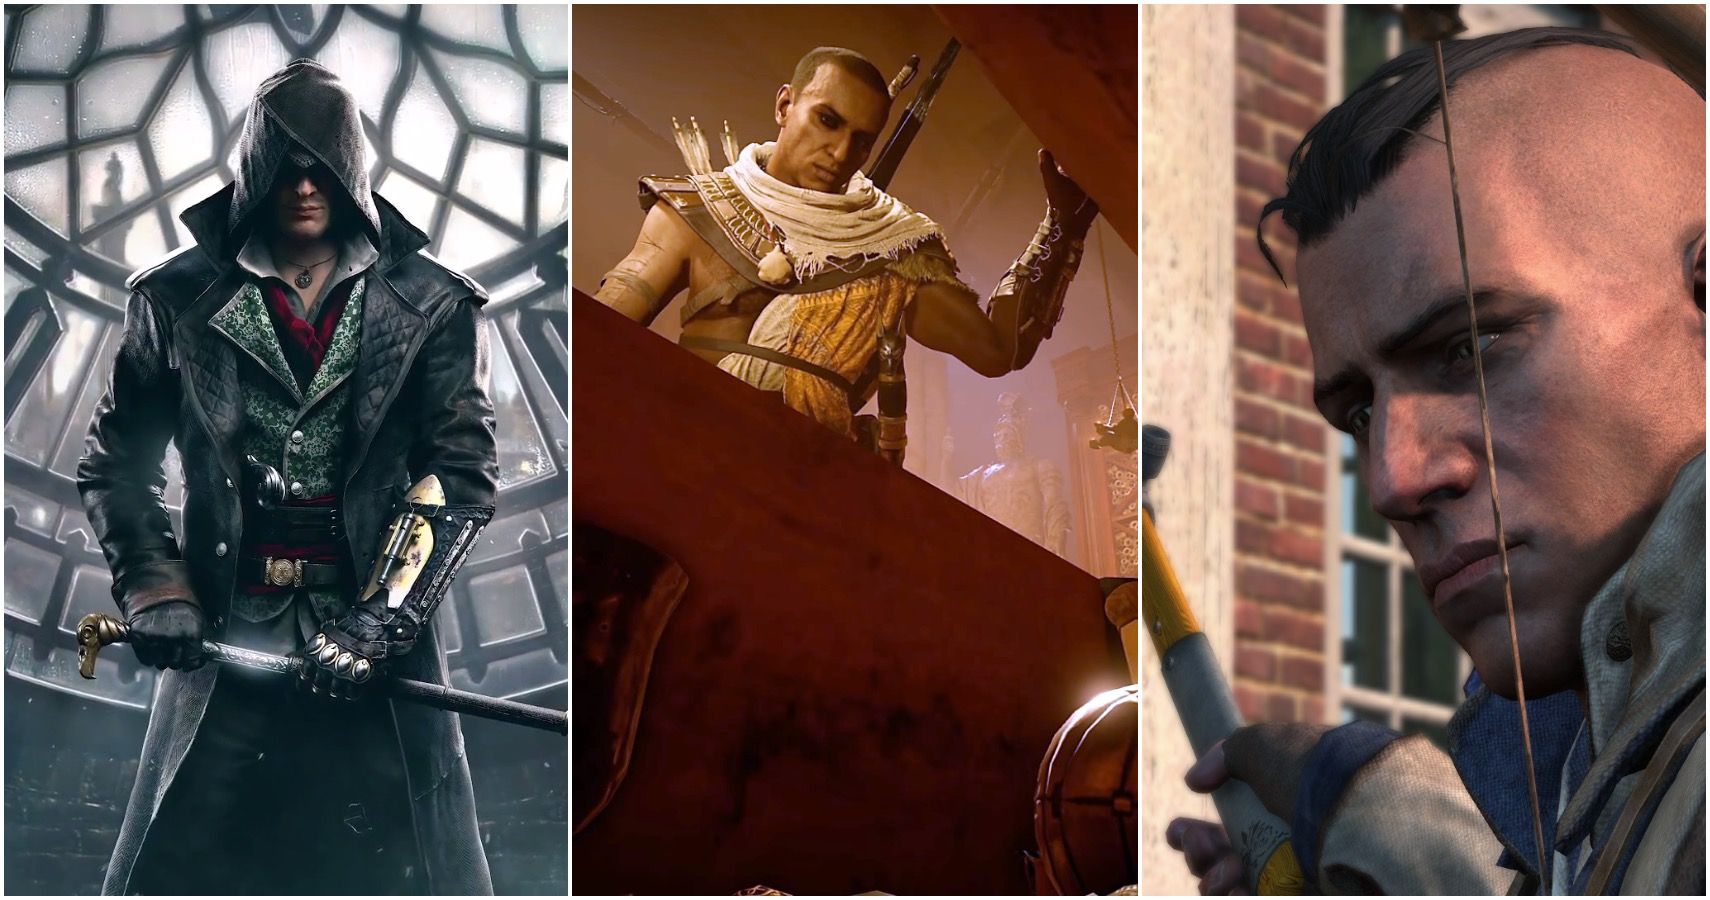 Jason Frye, Bayek, and Connor as their appear in their games